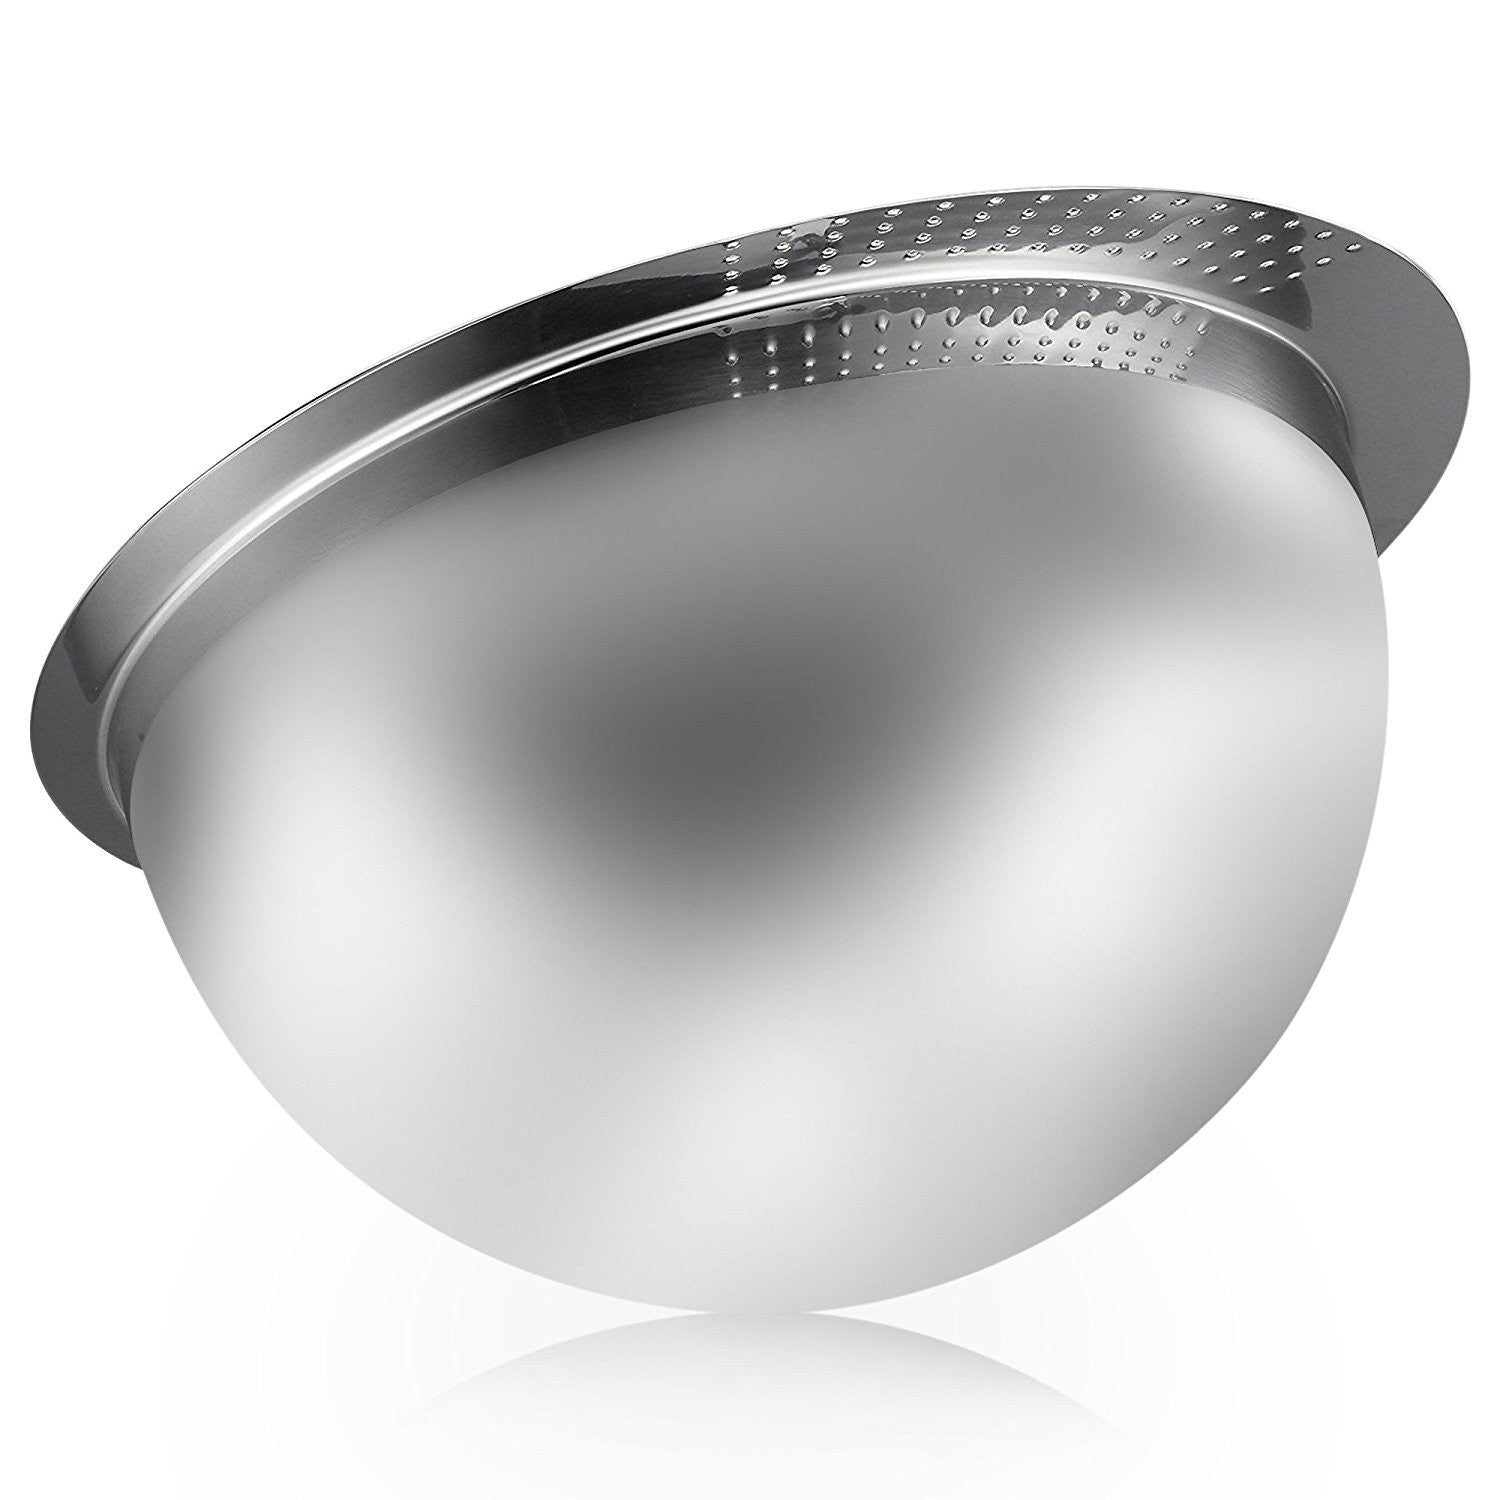 3.5 Quart Polished Stainless Steel Bowl with Handle